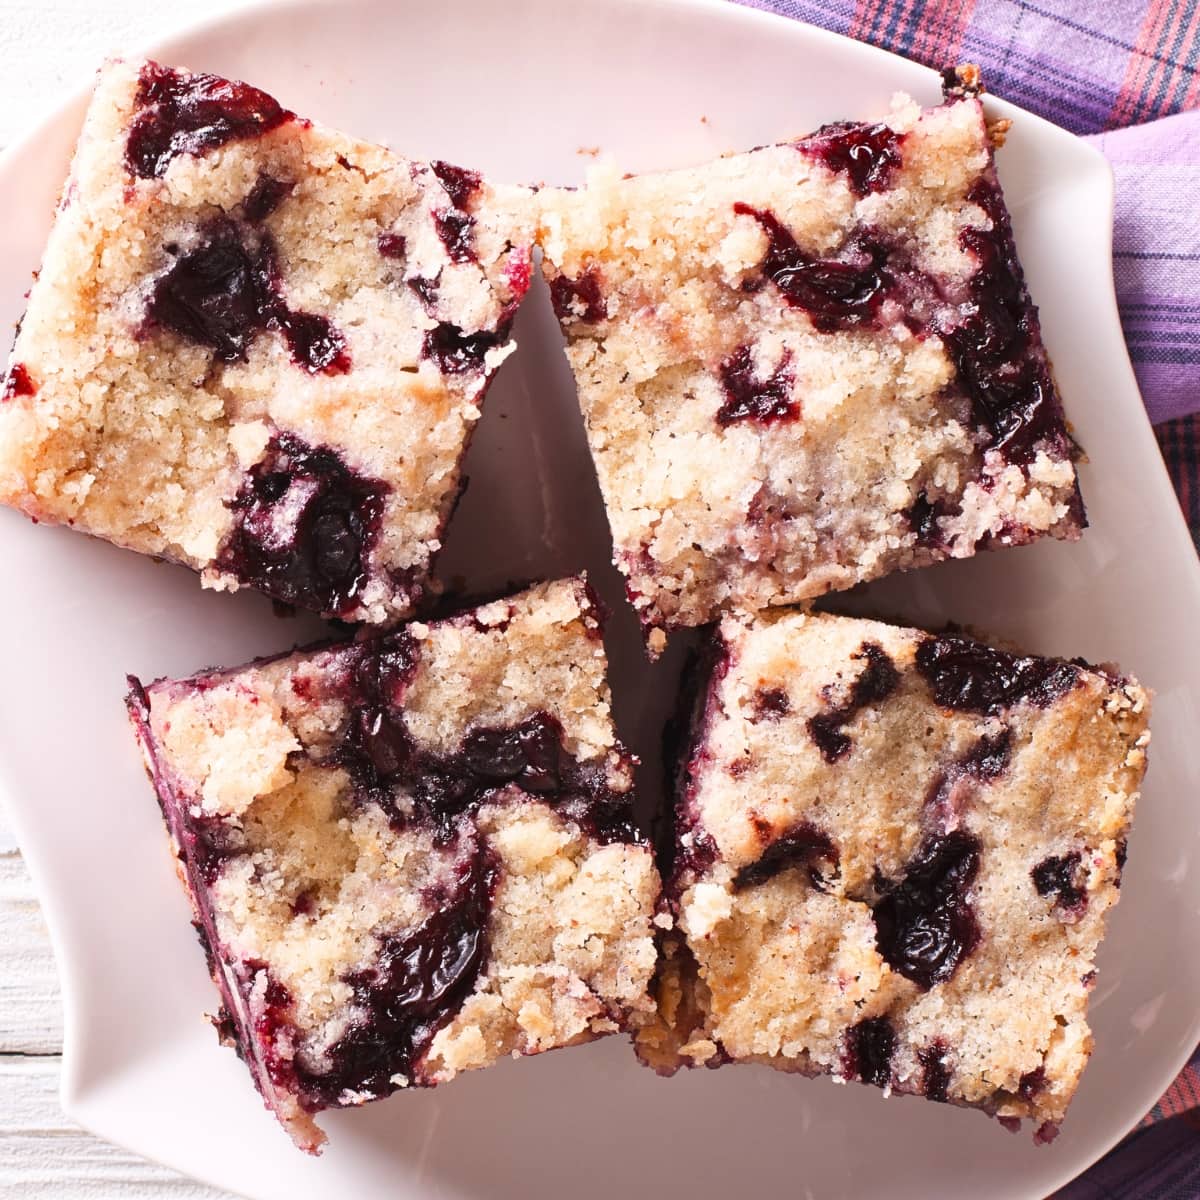 Top down view of sliced blueberry coffee cake on a plate